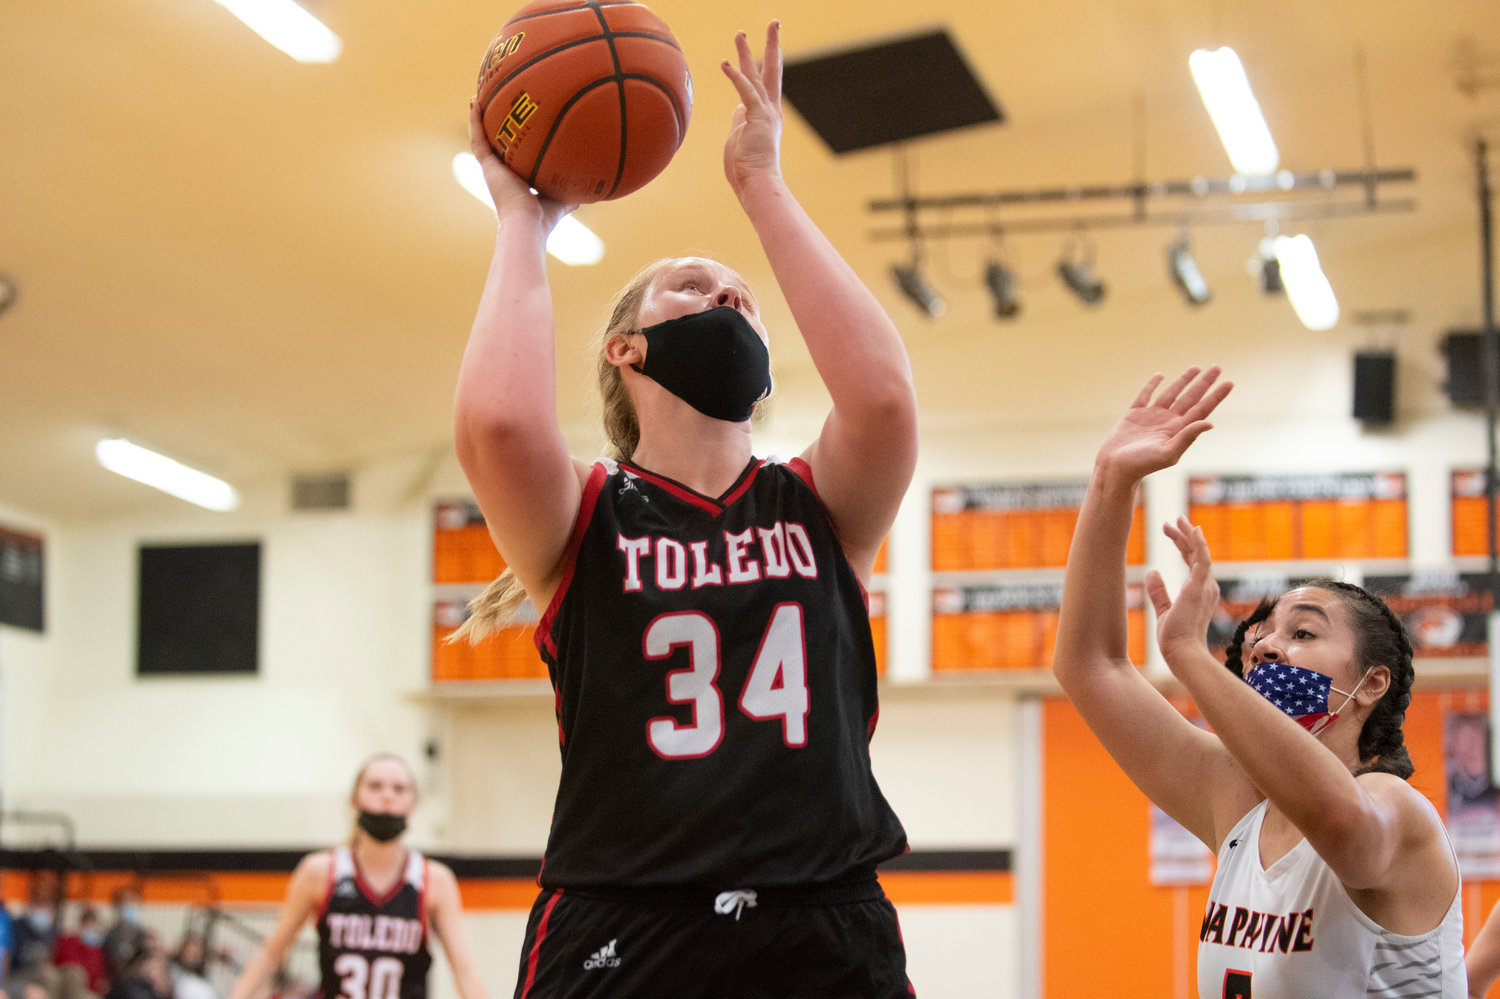 FILE PHOTO - Toledo senior Stacie Spahr (34) goes up for two points in the paint against Napavine earlier this season.